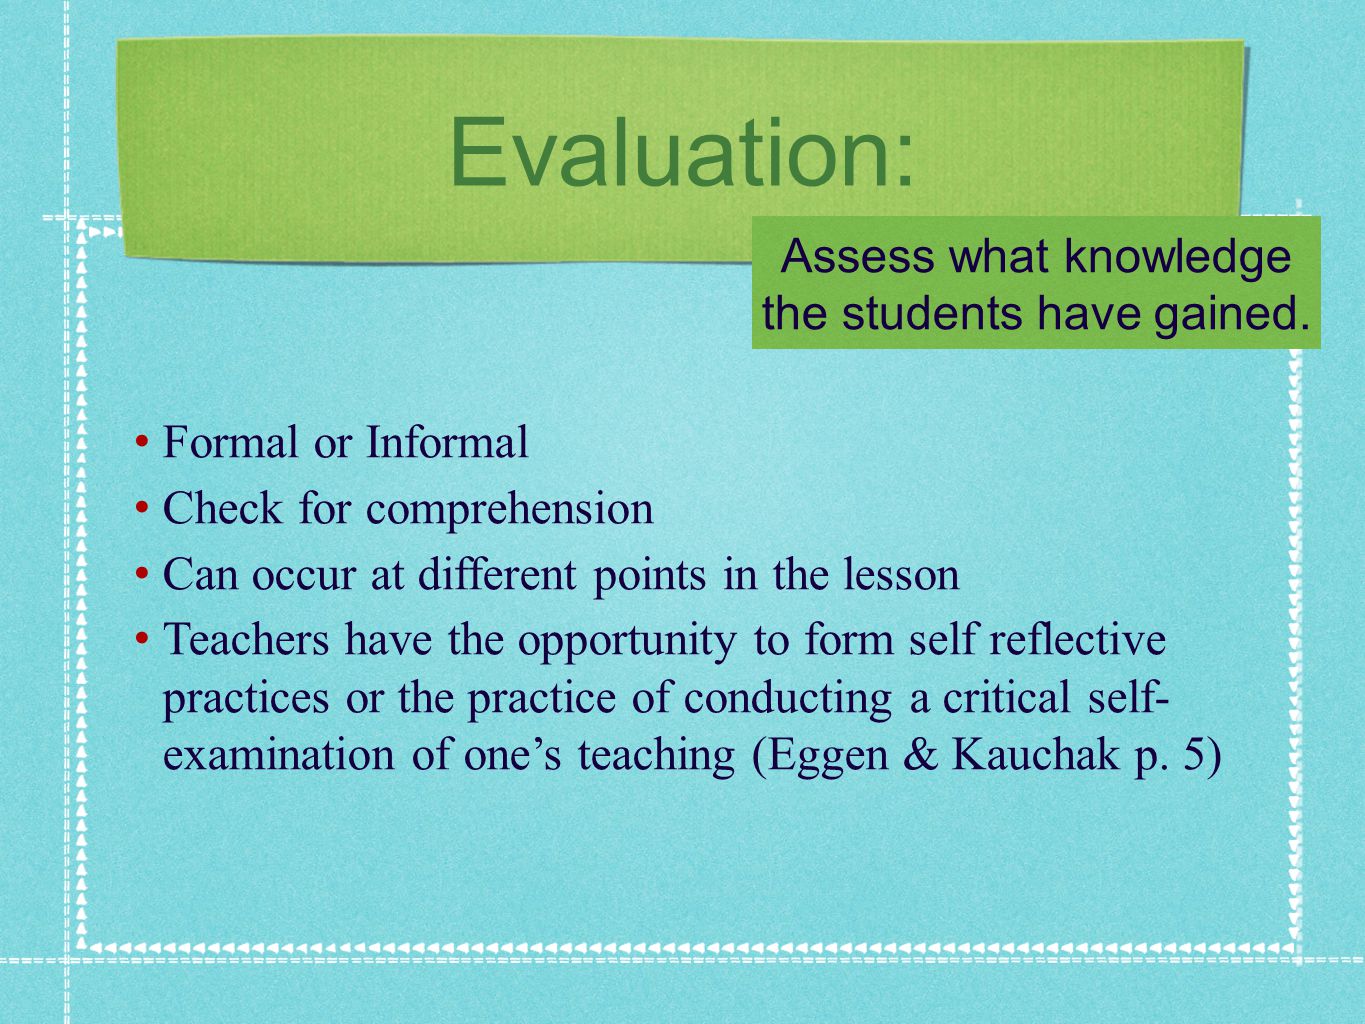 Evaluation: Formal or Informal Check for comprehension Can occur at different points in the lesson Teachers have the opportunity to form self reflective practices or the practice of conducting a critical self- examination of ones teaching (Eggen & Kauchak p.